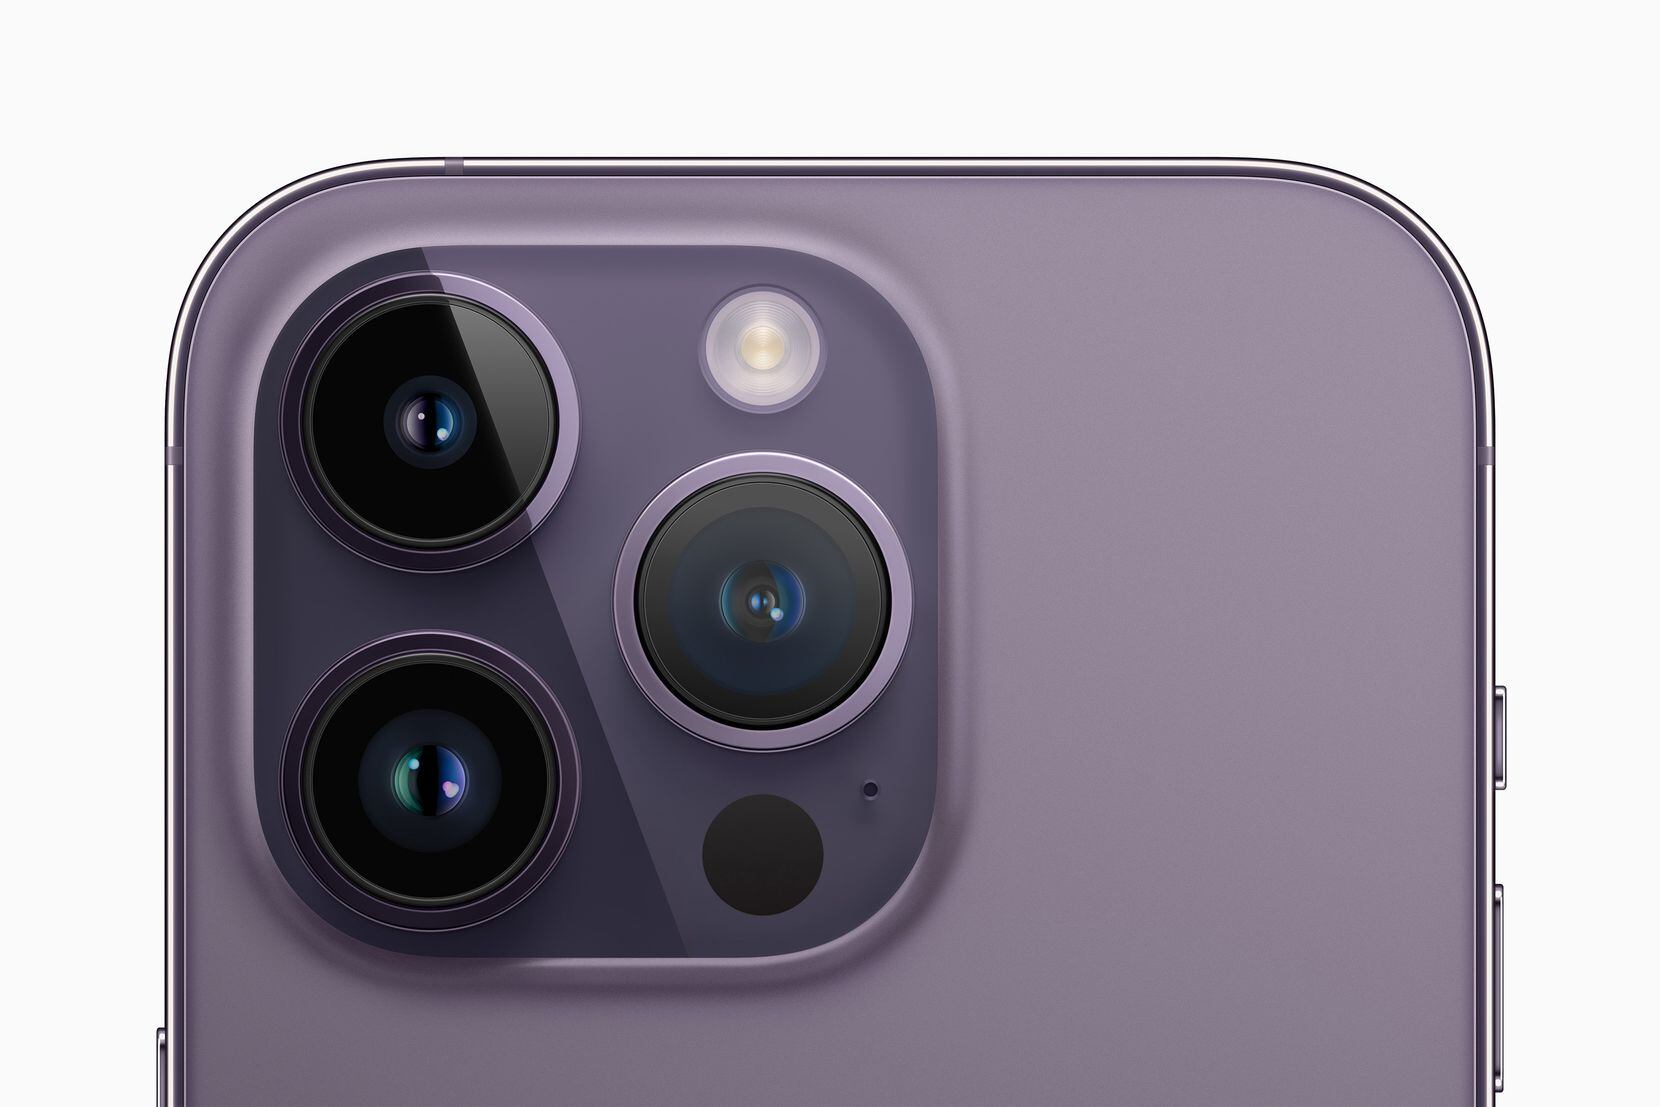 The Apple iPhone 14 Pro's main camera has a 24-millimeter wide-angle lens with a...